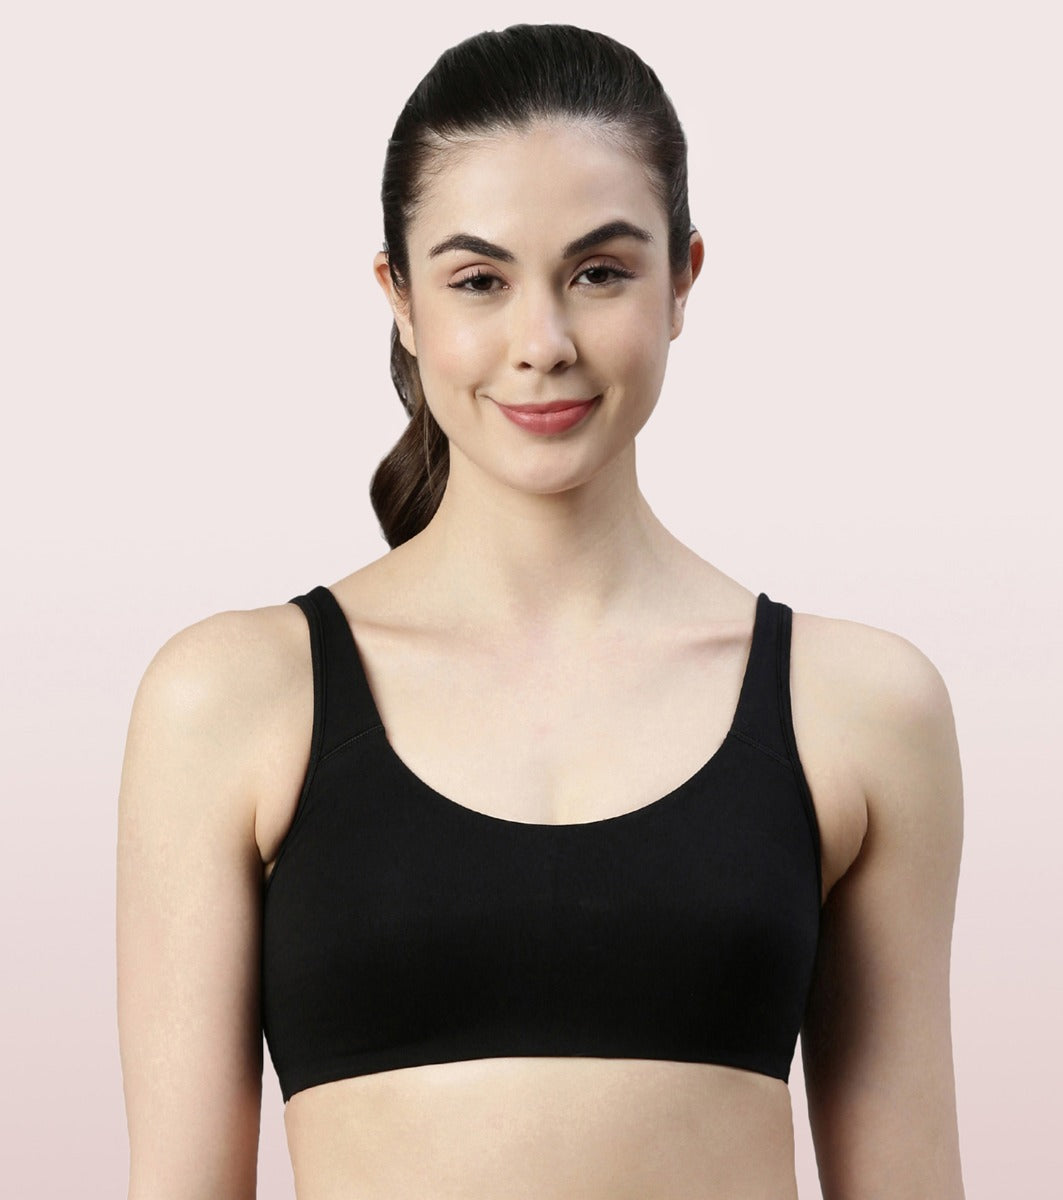 Enamor F090 Women Full Coverage Non Padded Bra - Buy Enamor F090 Women Full  Coverage Non Padded Bra Online at Best Prices in India